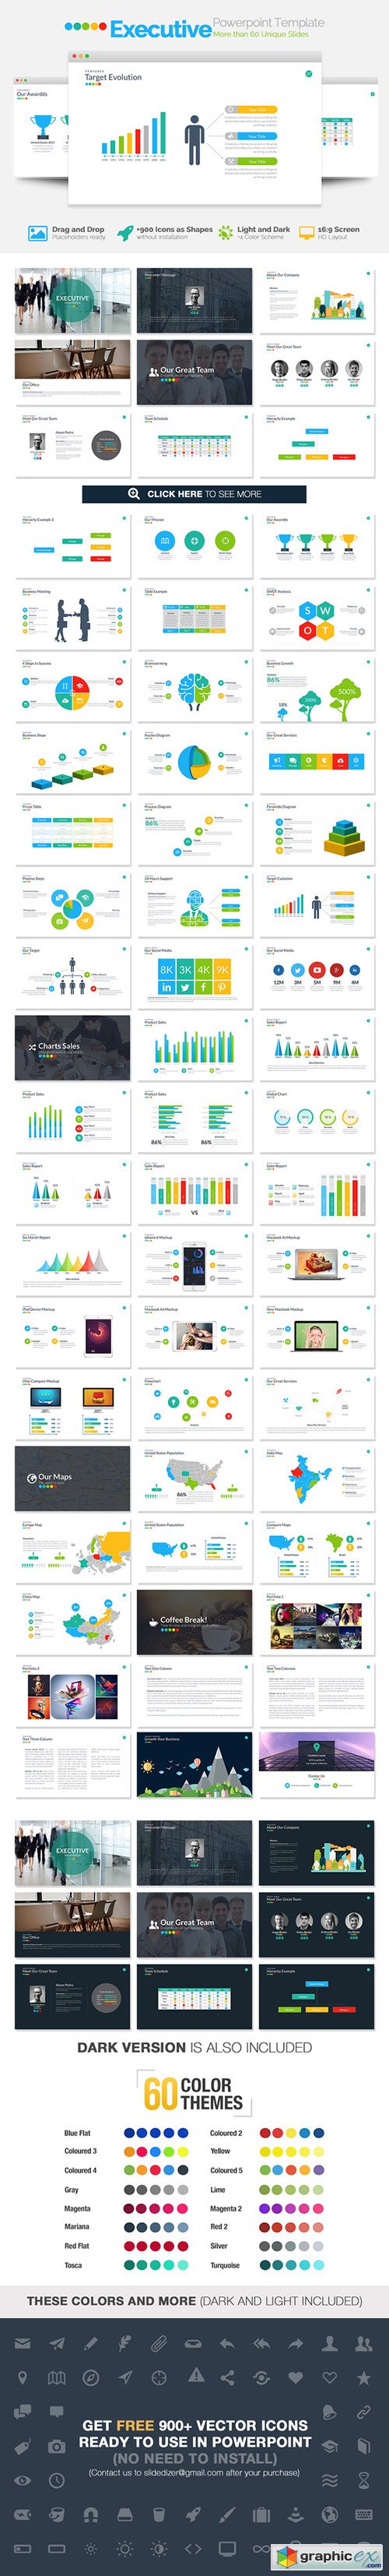  Executive Powerpoint Template